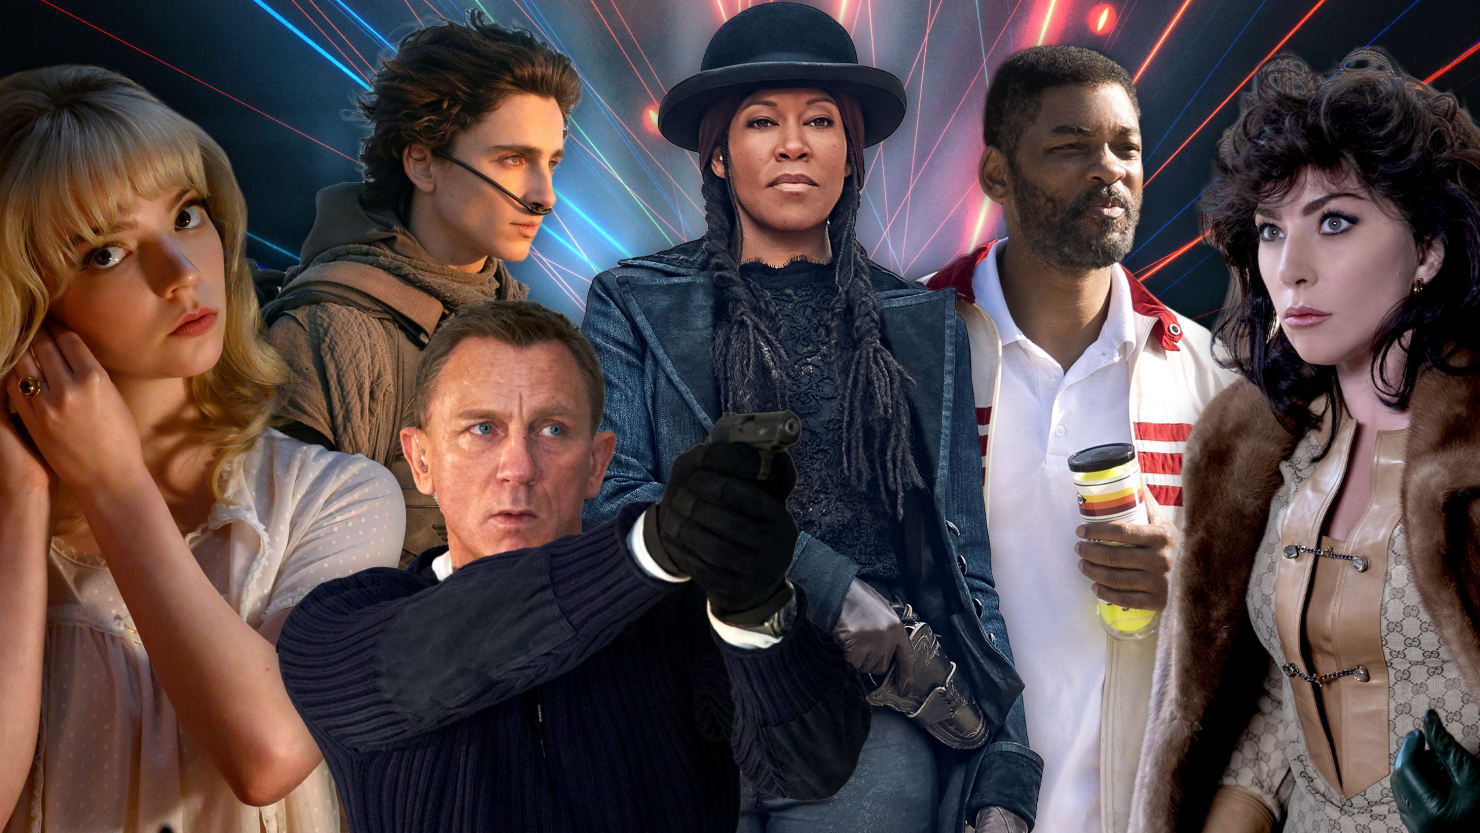 The Most Anticipated Fall Movies, From James Bond to Lady Gaga